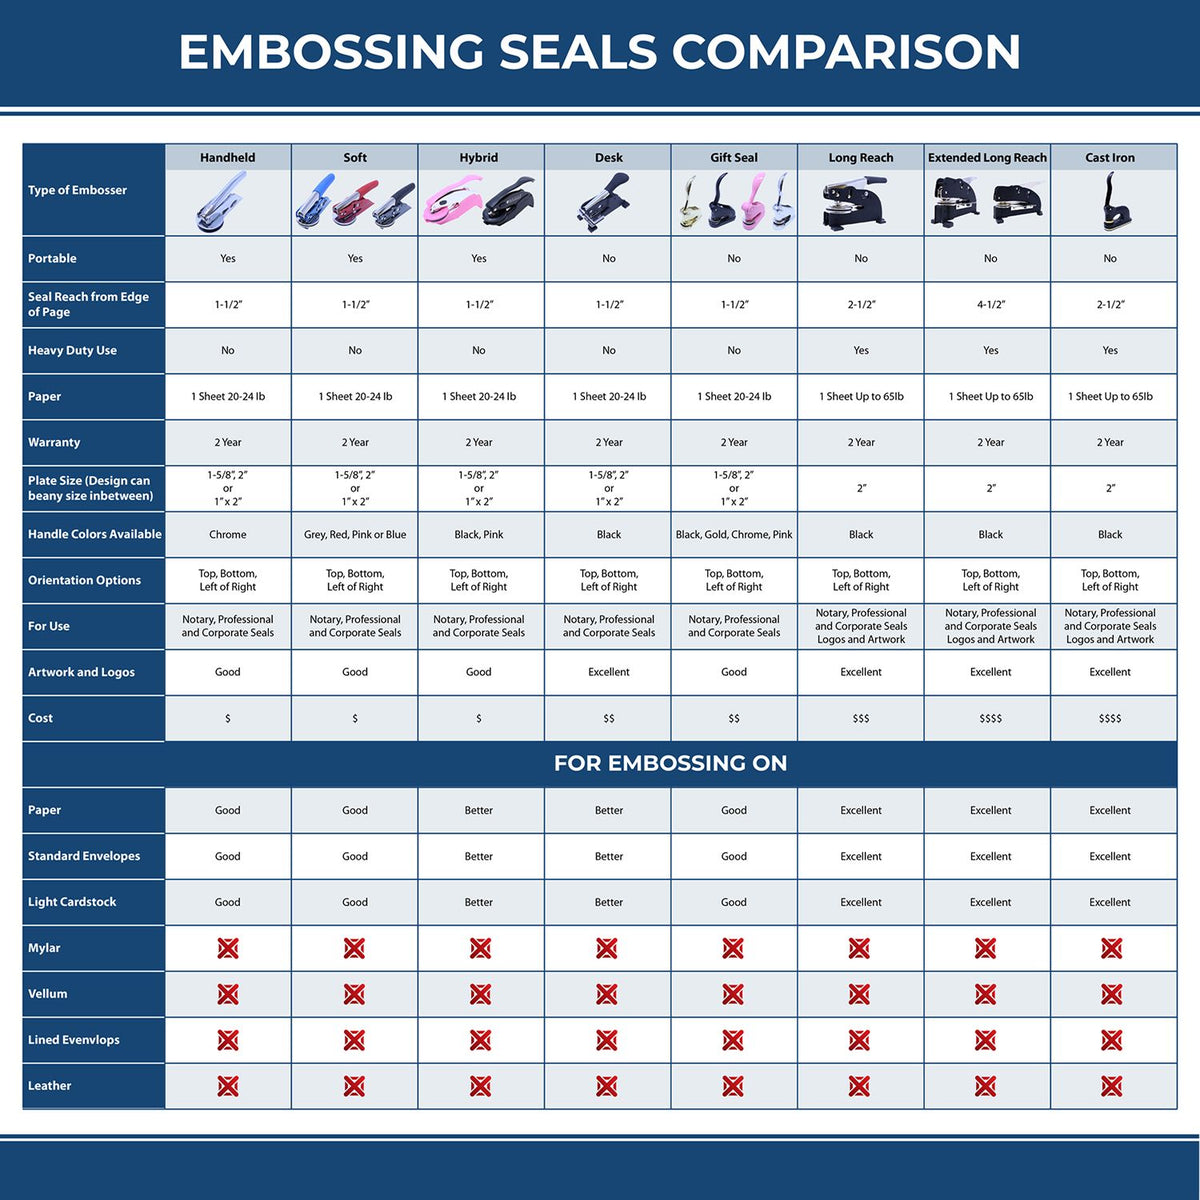 A comparison chart for the different types of mount models available for the Soft Alaska Professional Engineer Seal.